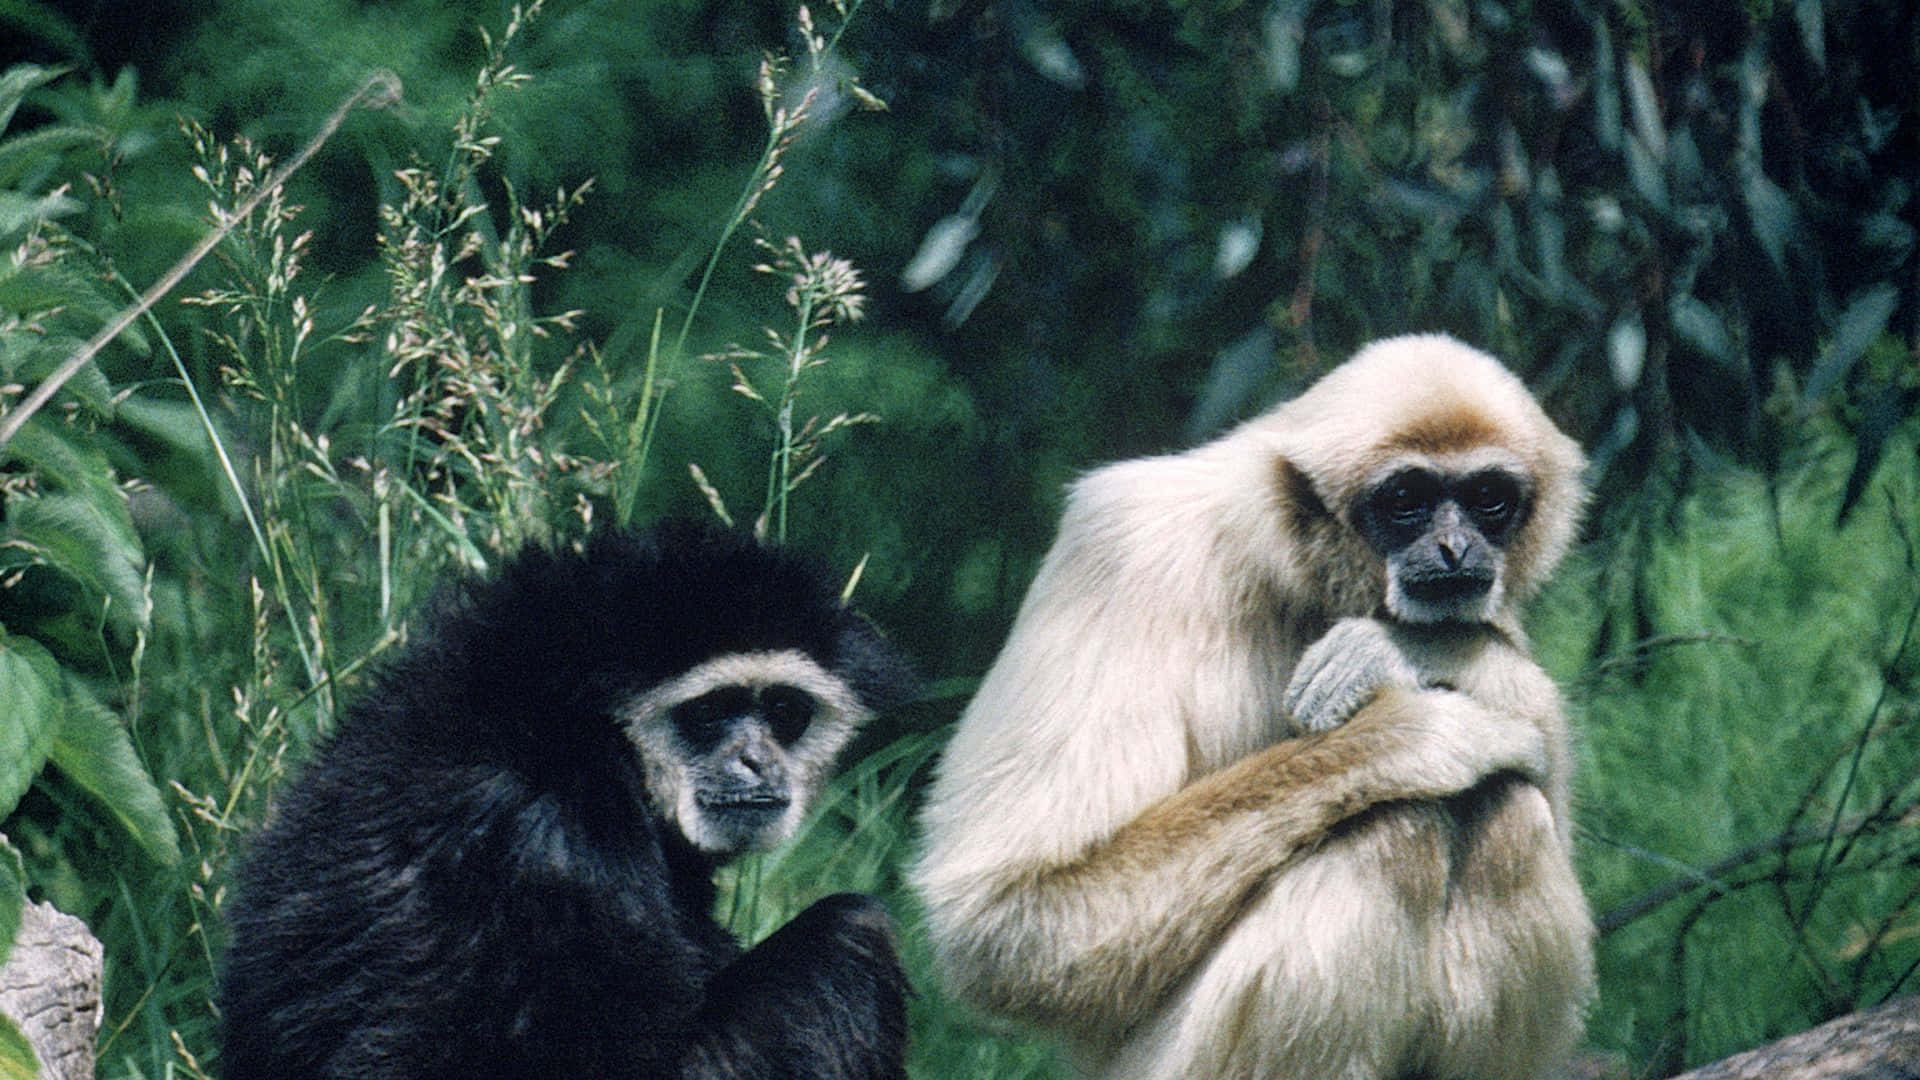 A curious white-handed gibbon surrounded by lush green foliage